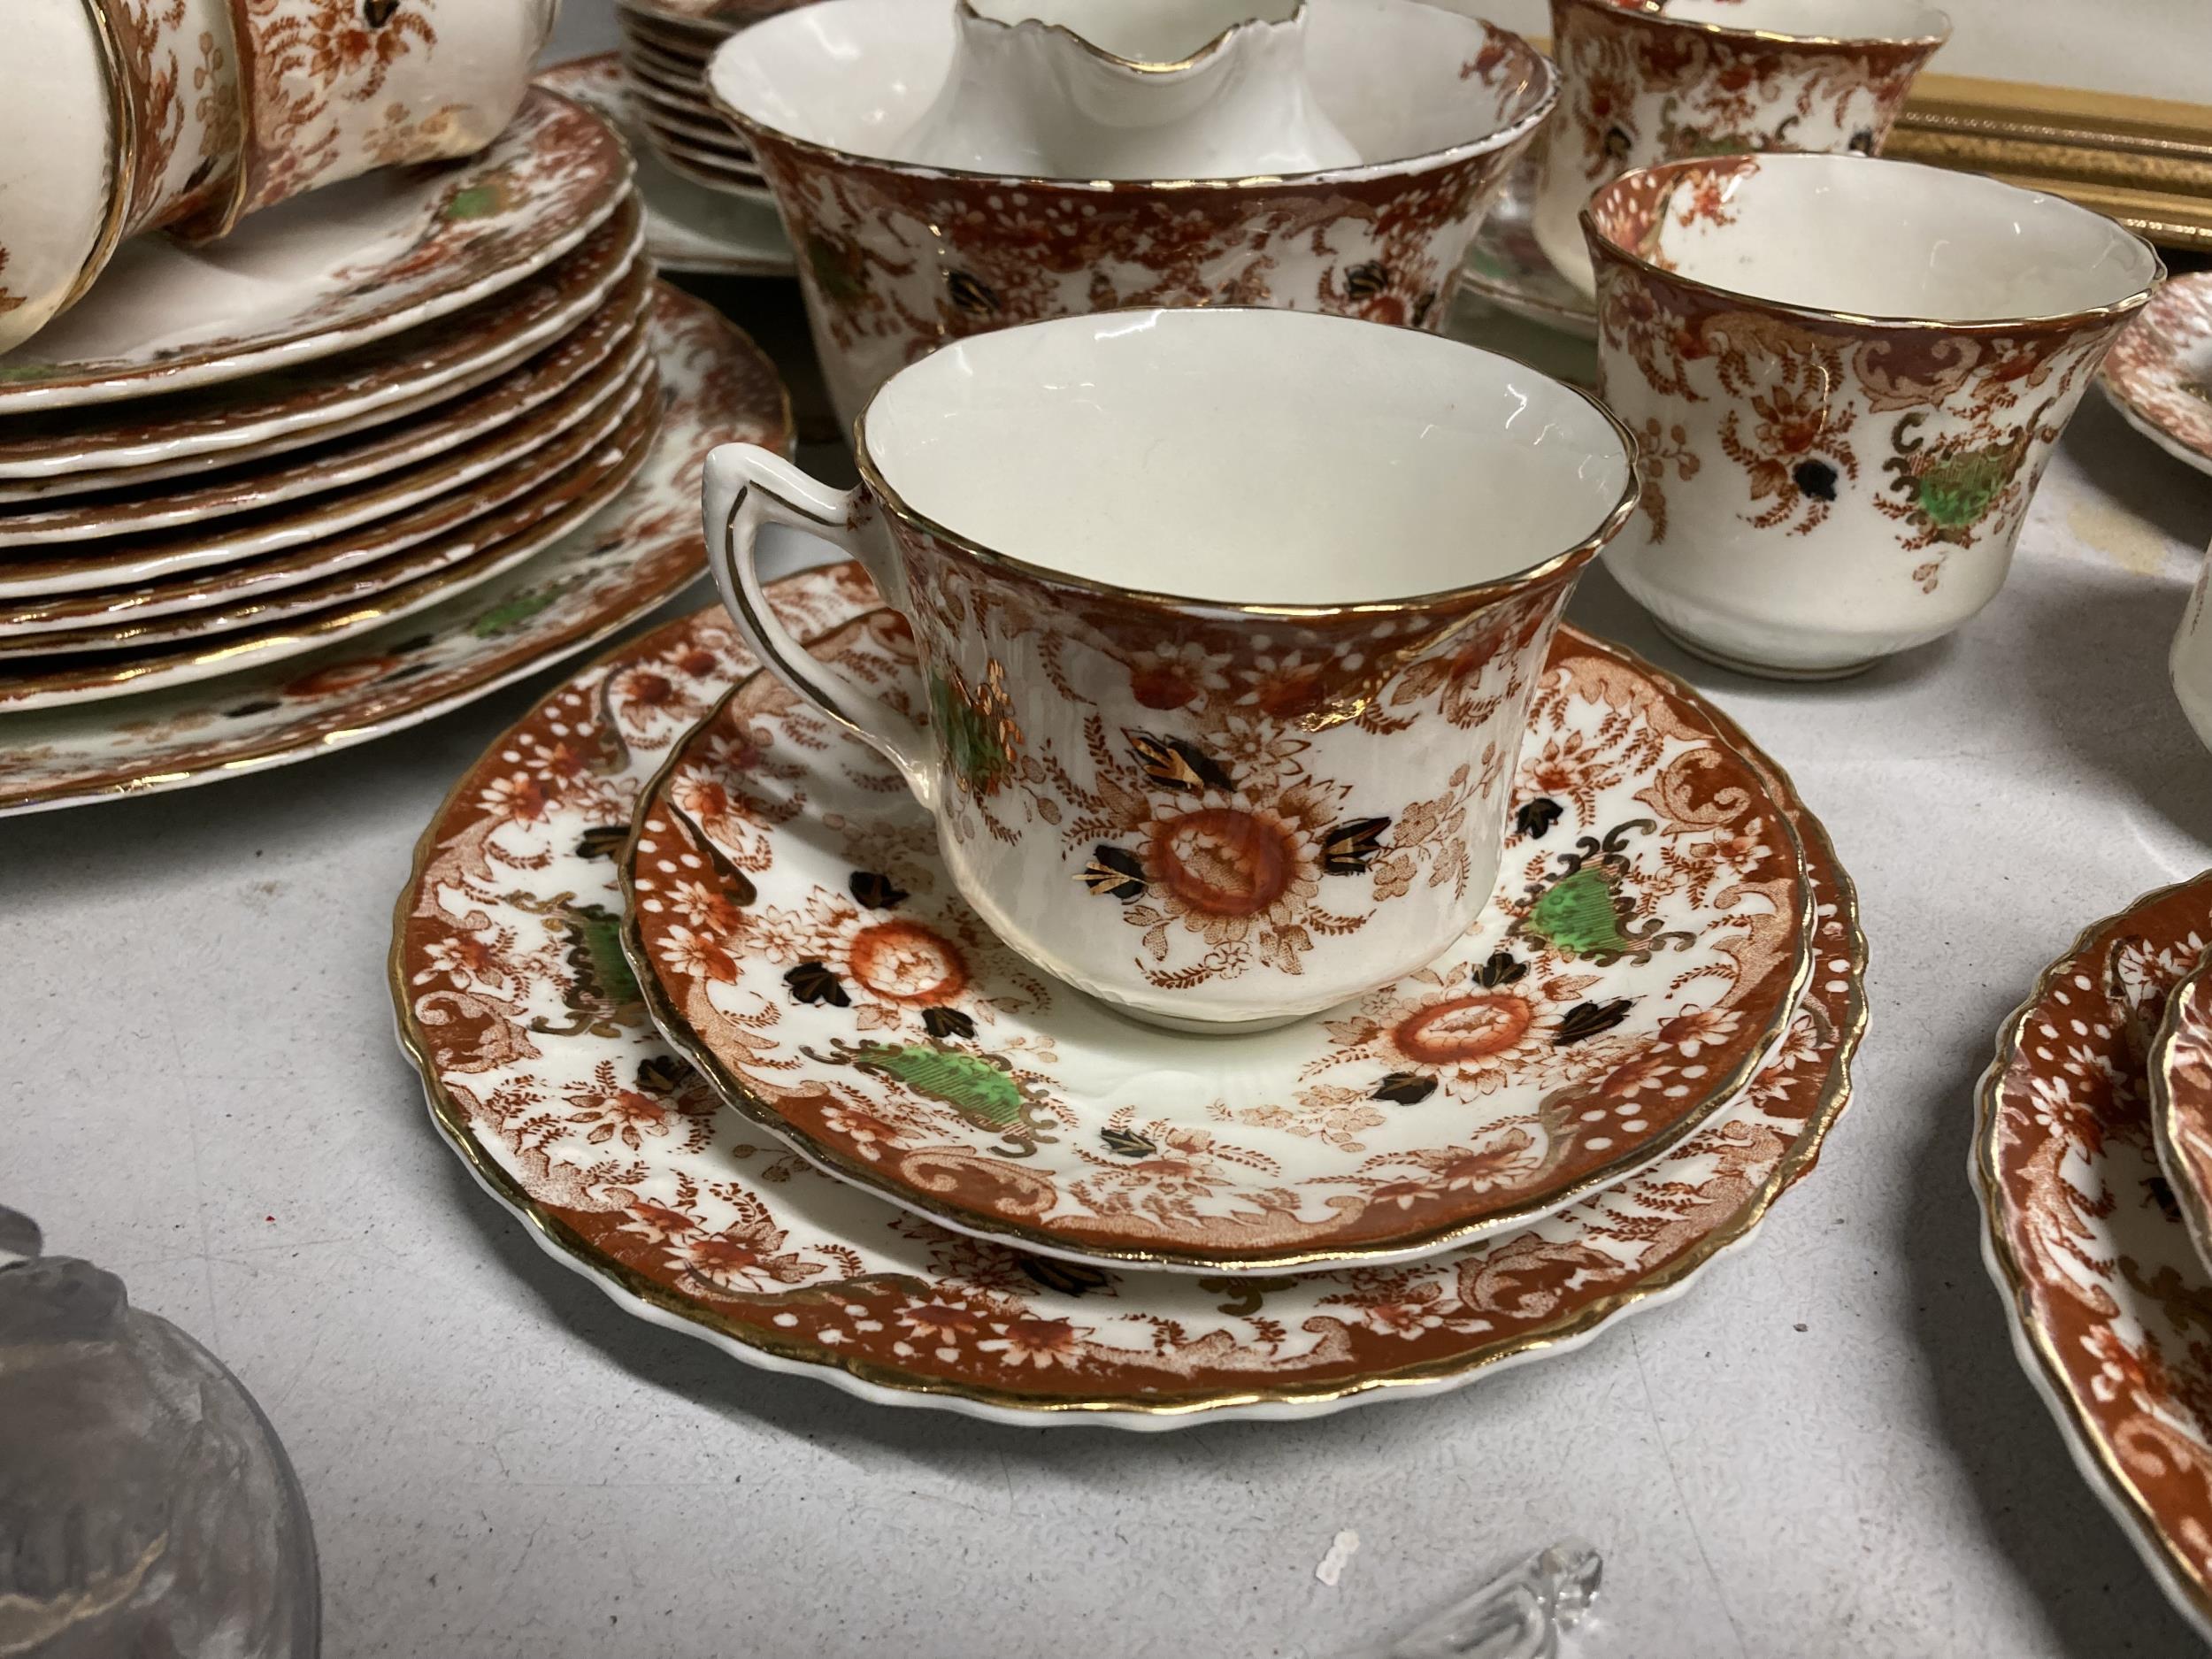 A QUANTITY OF VINTAGE 'DUKE' TEAWARE TO INCLUDE CAKE PLATES, CUPS, SAUCERS, A SUGAR BASIN AND - Image 2 of 3